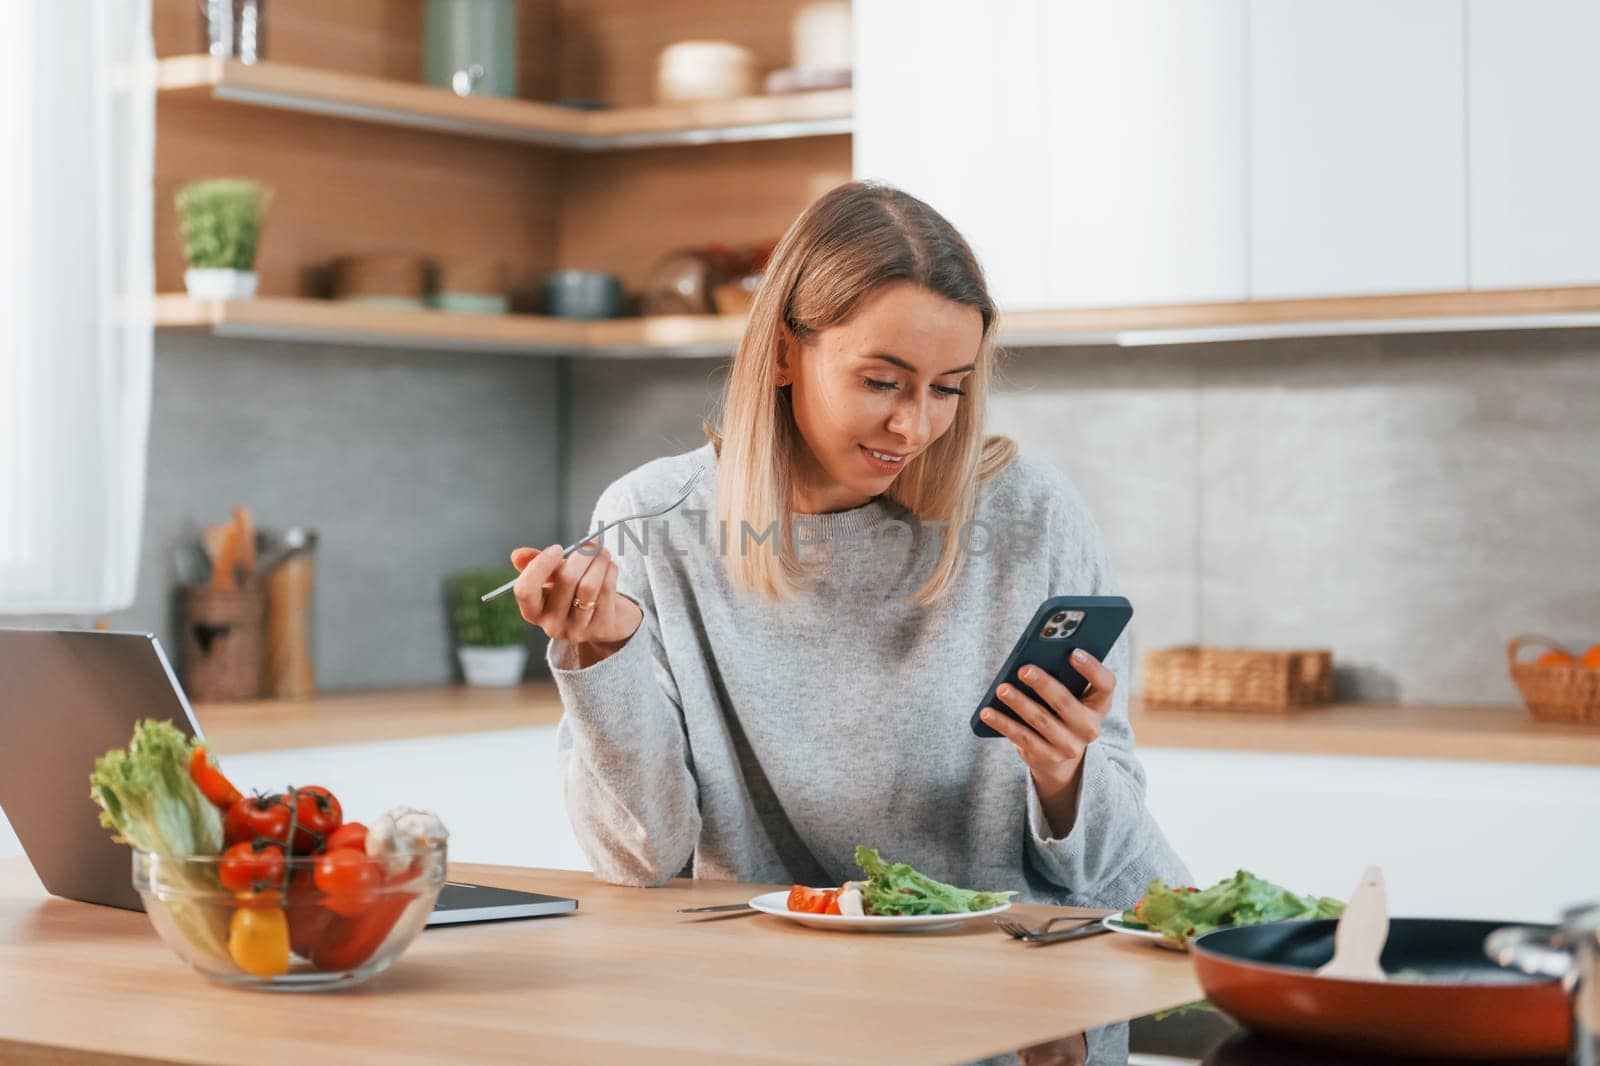 Holding phone. Woman preparing food at home on the modern kitchen.